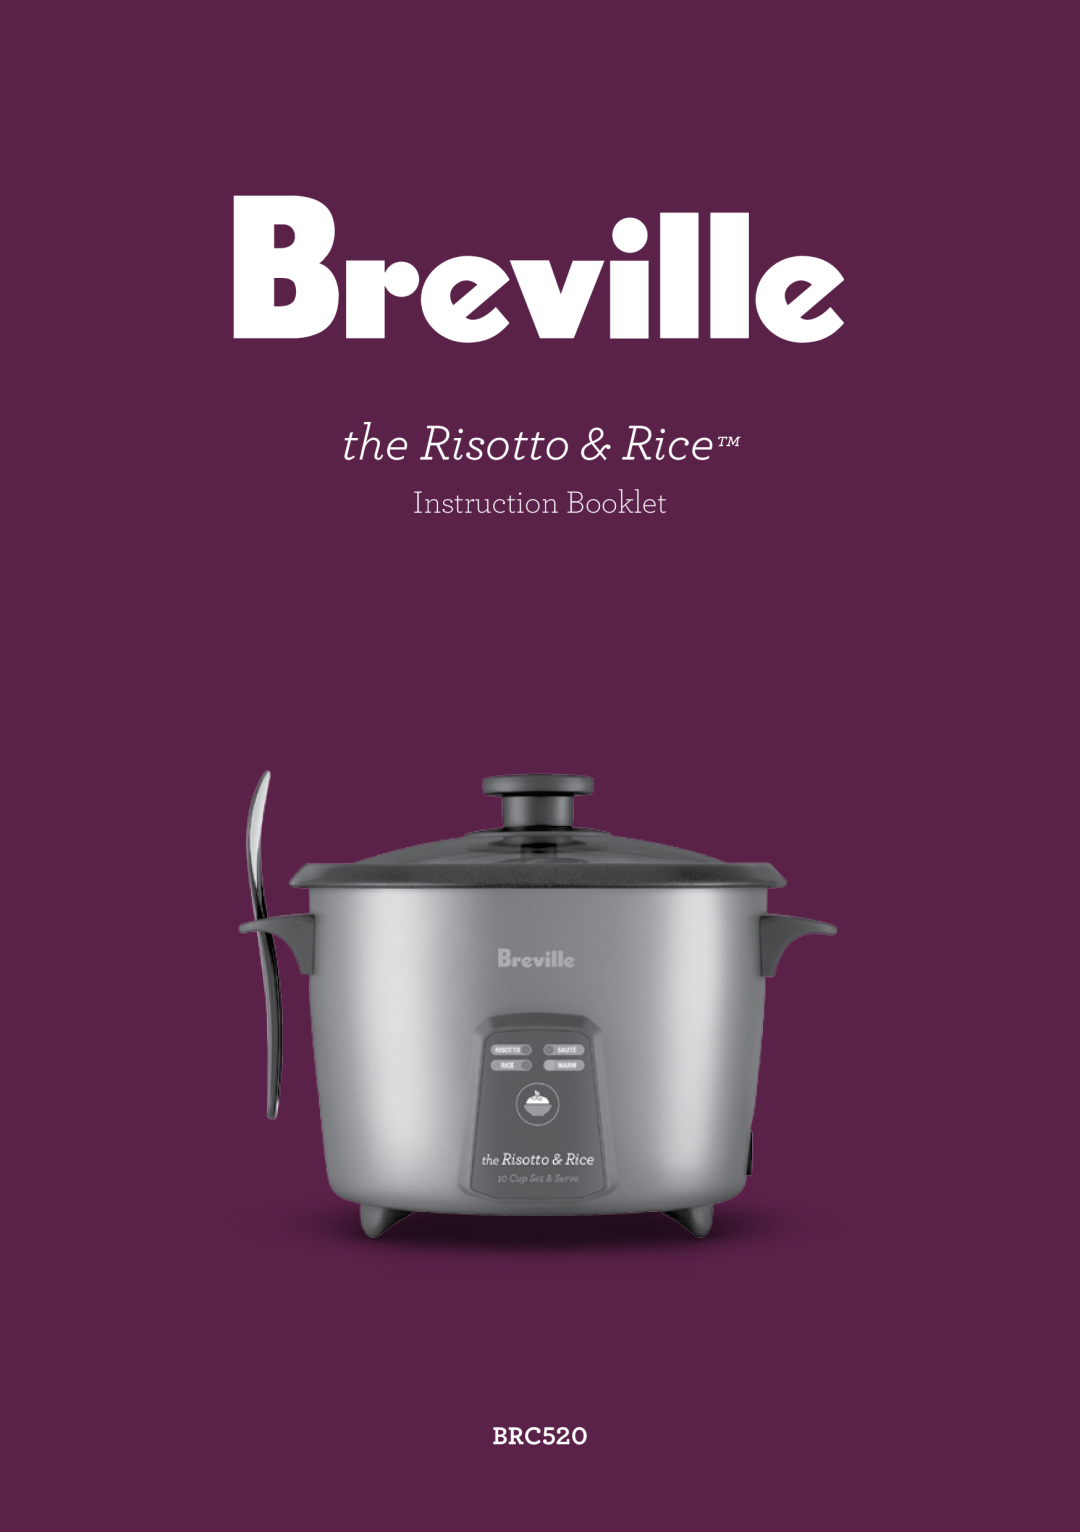 Breville BRC520 manual the Risotto & Rice, Instruction Booklet 